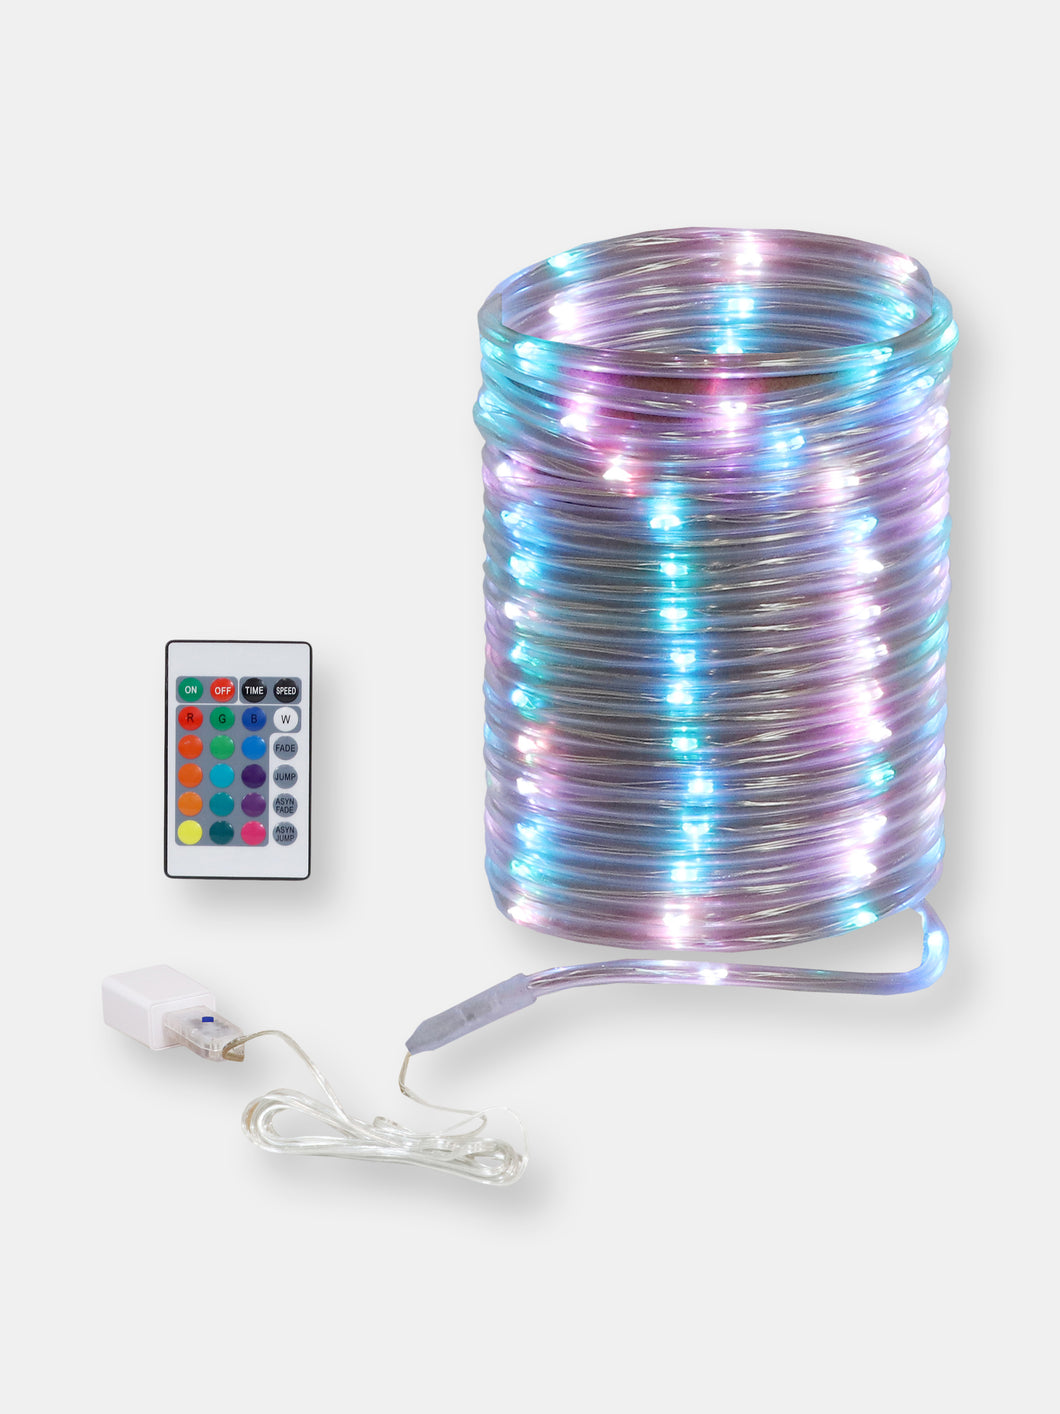 Indoor LED Light Strip with Remote Control - 16 Colors - 32' 8